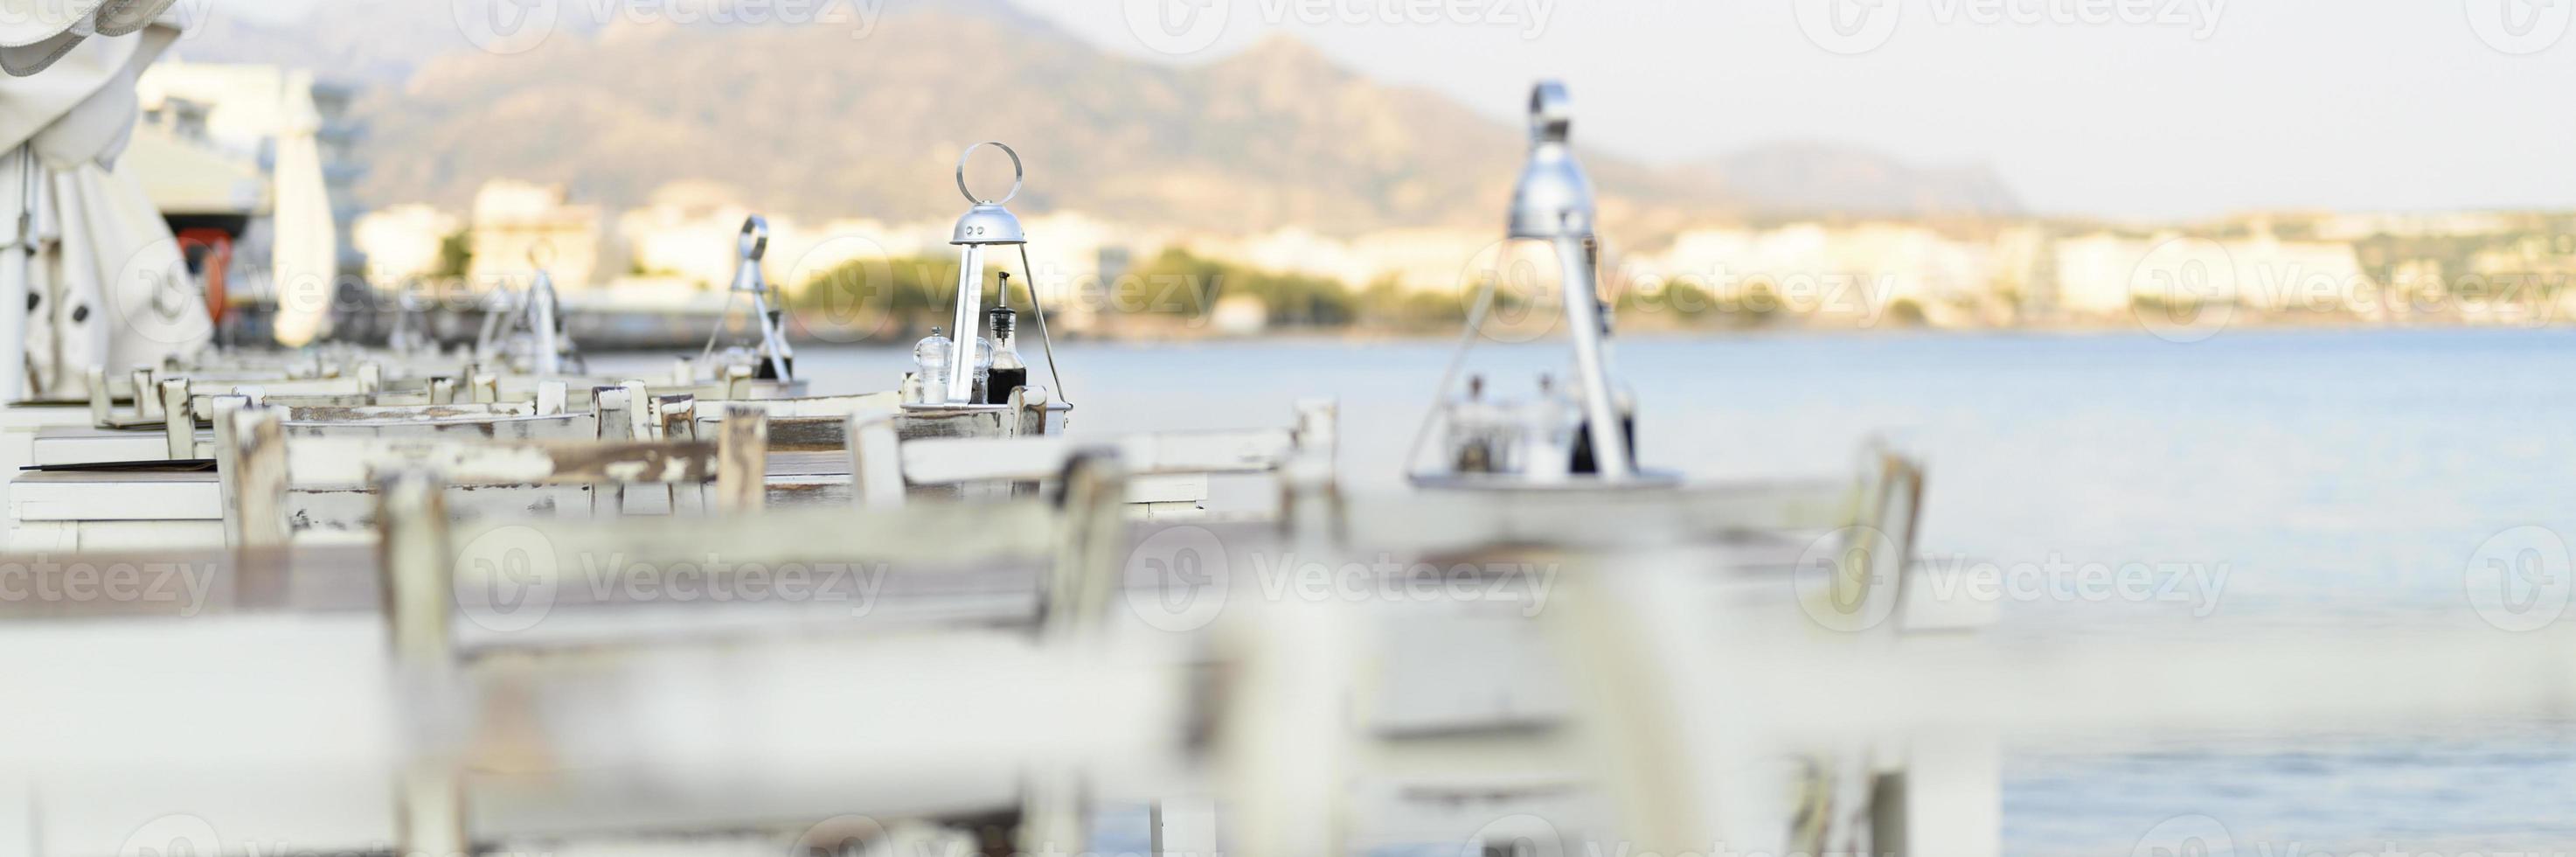 Cafe tables on the sea mediterranean embankment photo